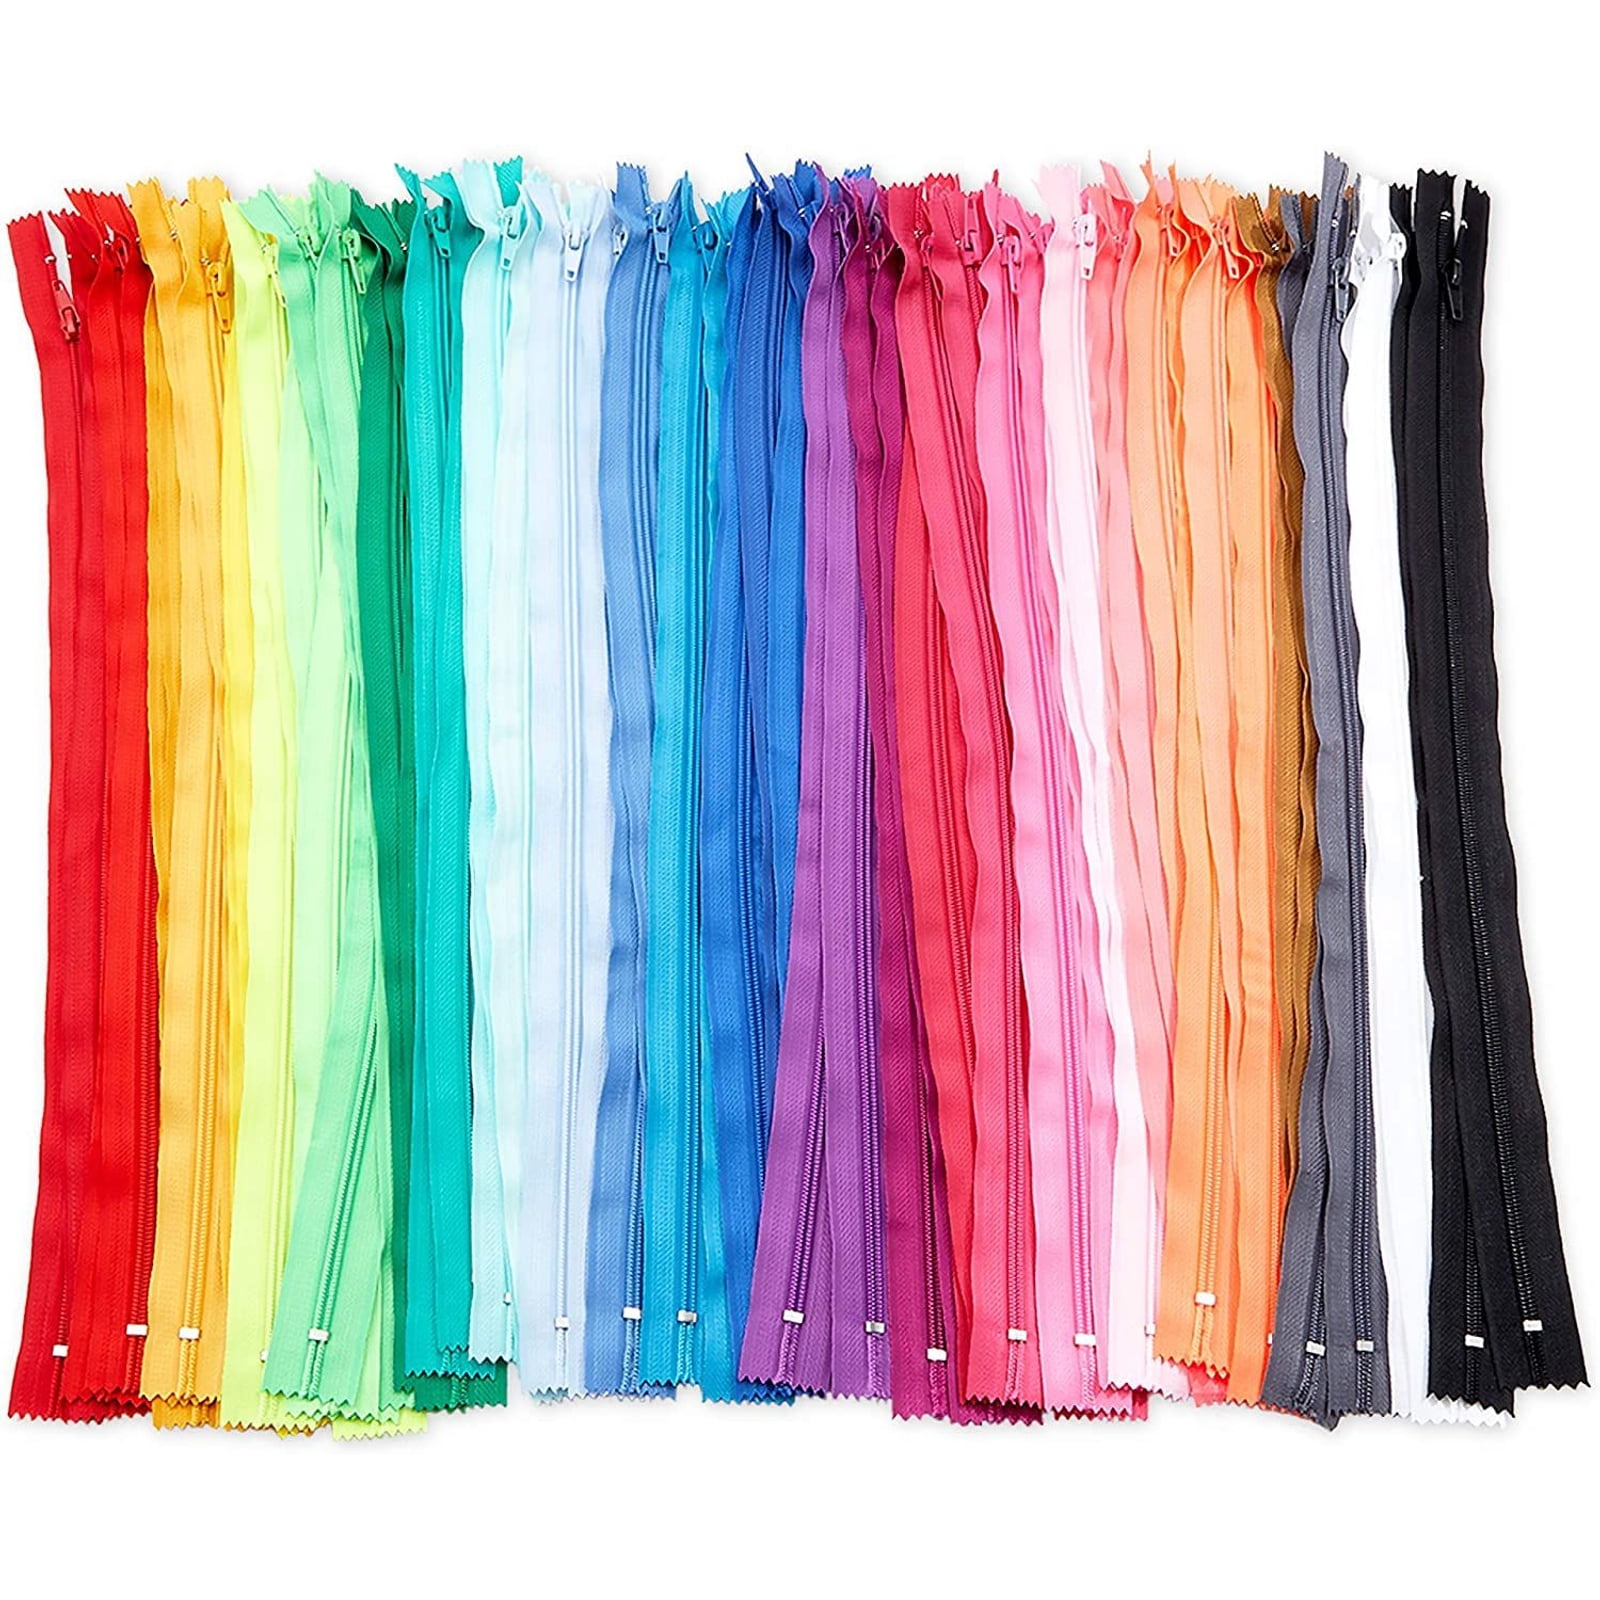  Nylon Coil Zippers,Invisible Zippers, 50pcs/lot 18cm Mixed  Color Extra Strong Side Nylon Fabric Invisible Zippers for Sewing Dress  Garment Craft, Strong and Sturdy (Size : 3#)